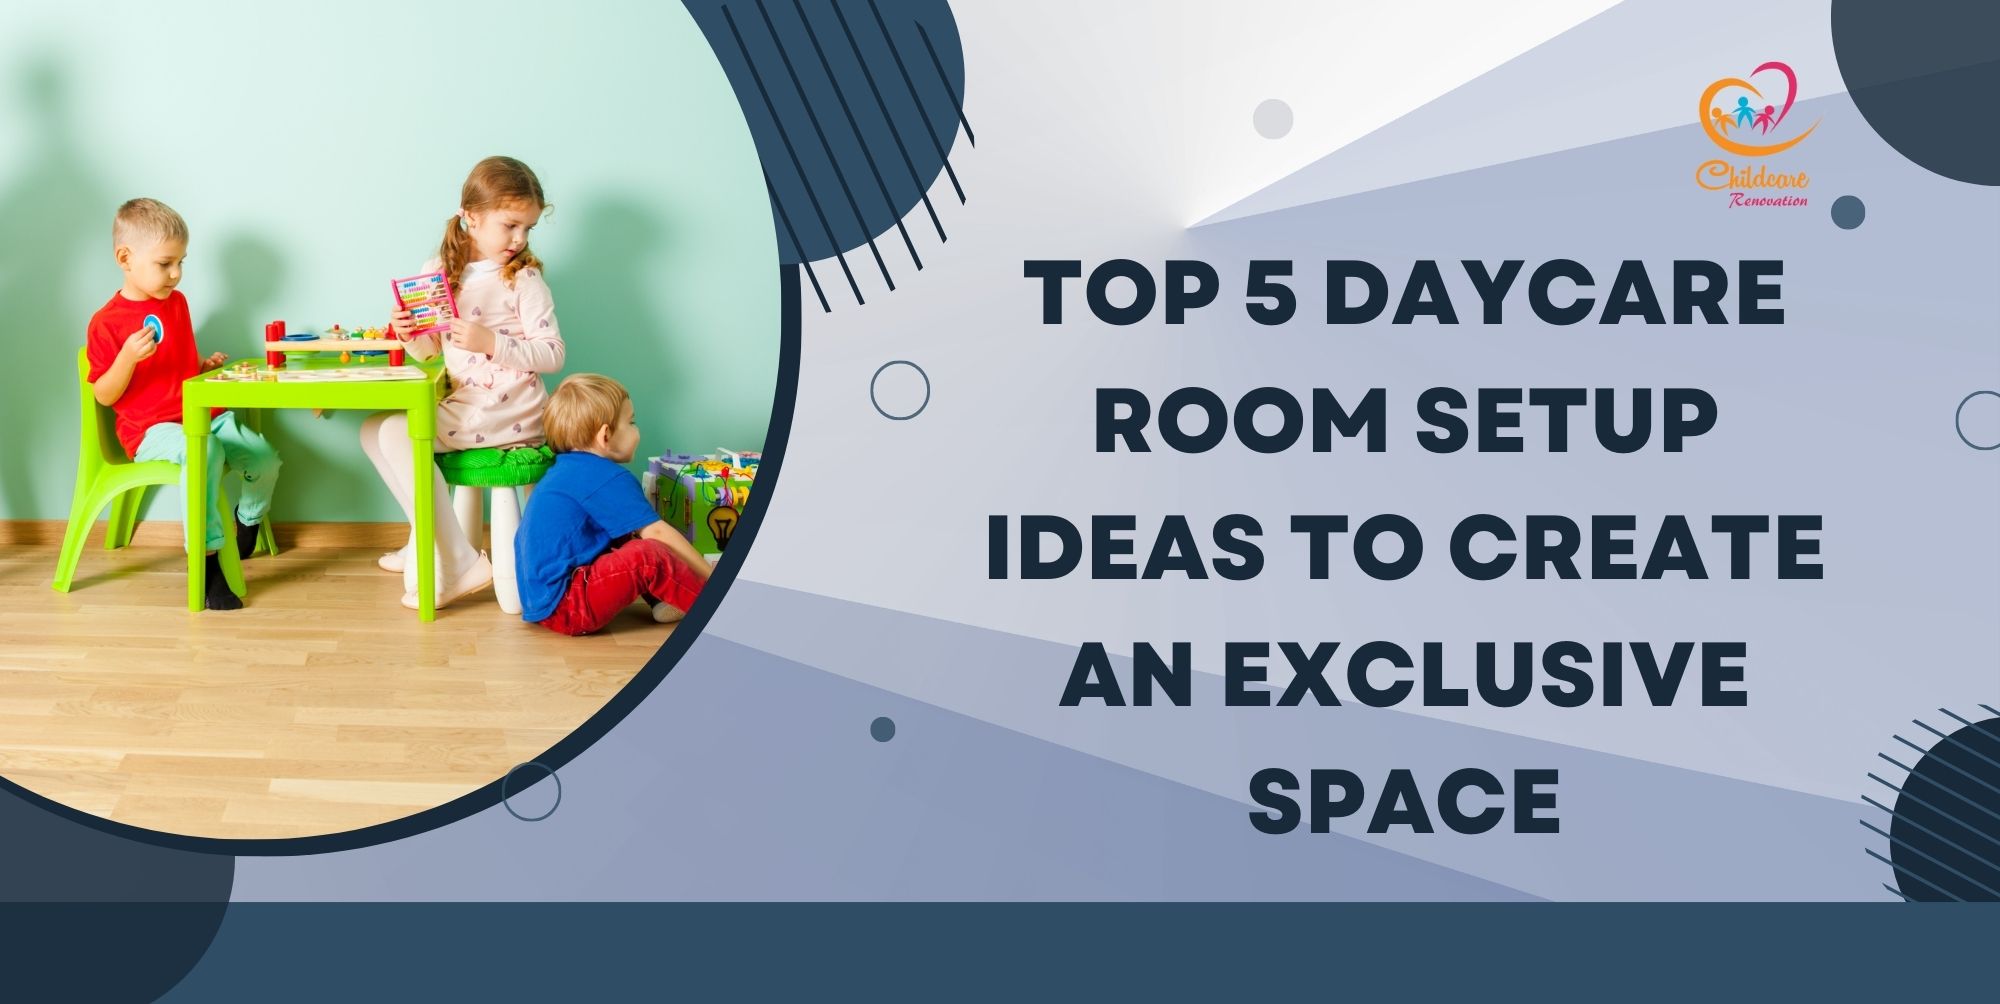 Top 5 Daycare Room Setup Ideas To Create An Exclusive Space